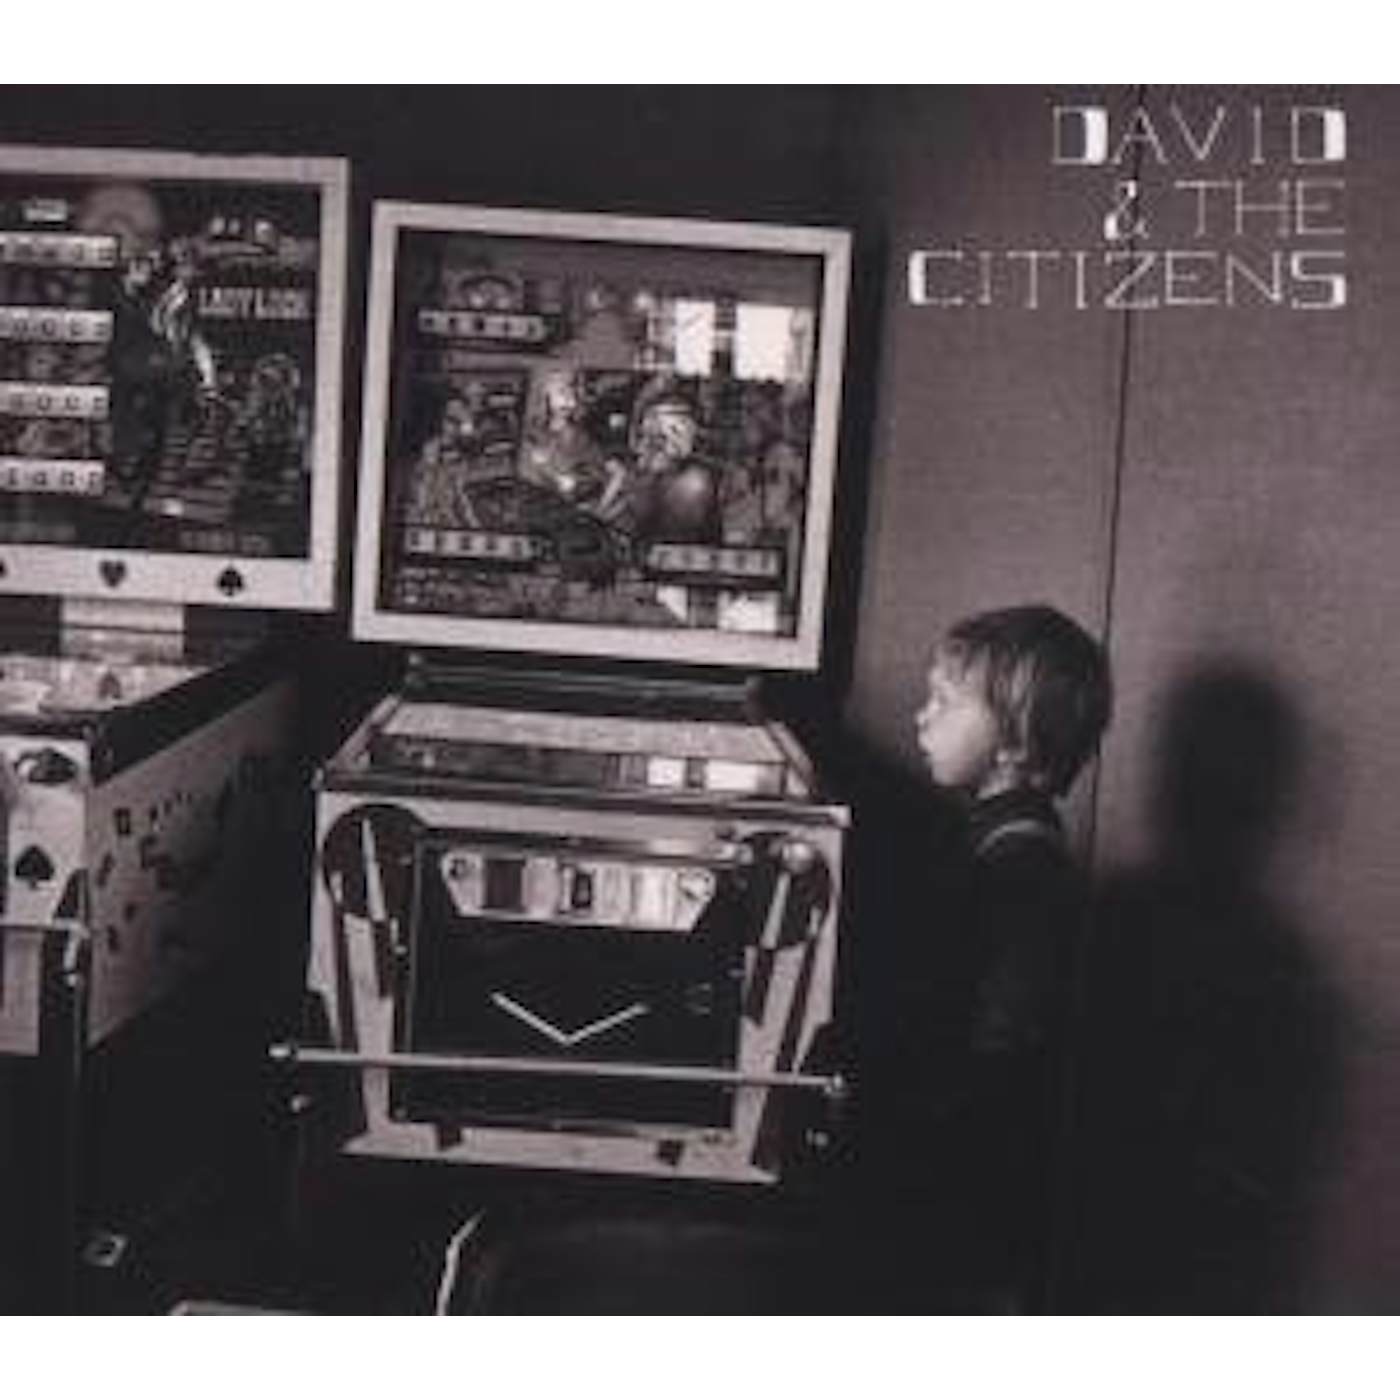 David & The Citizens STOP THE TAPE! STOP THE TAPE! CD